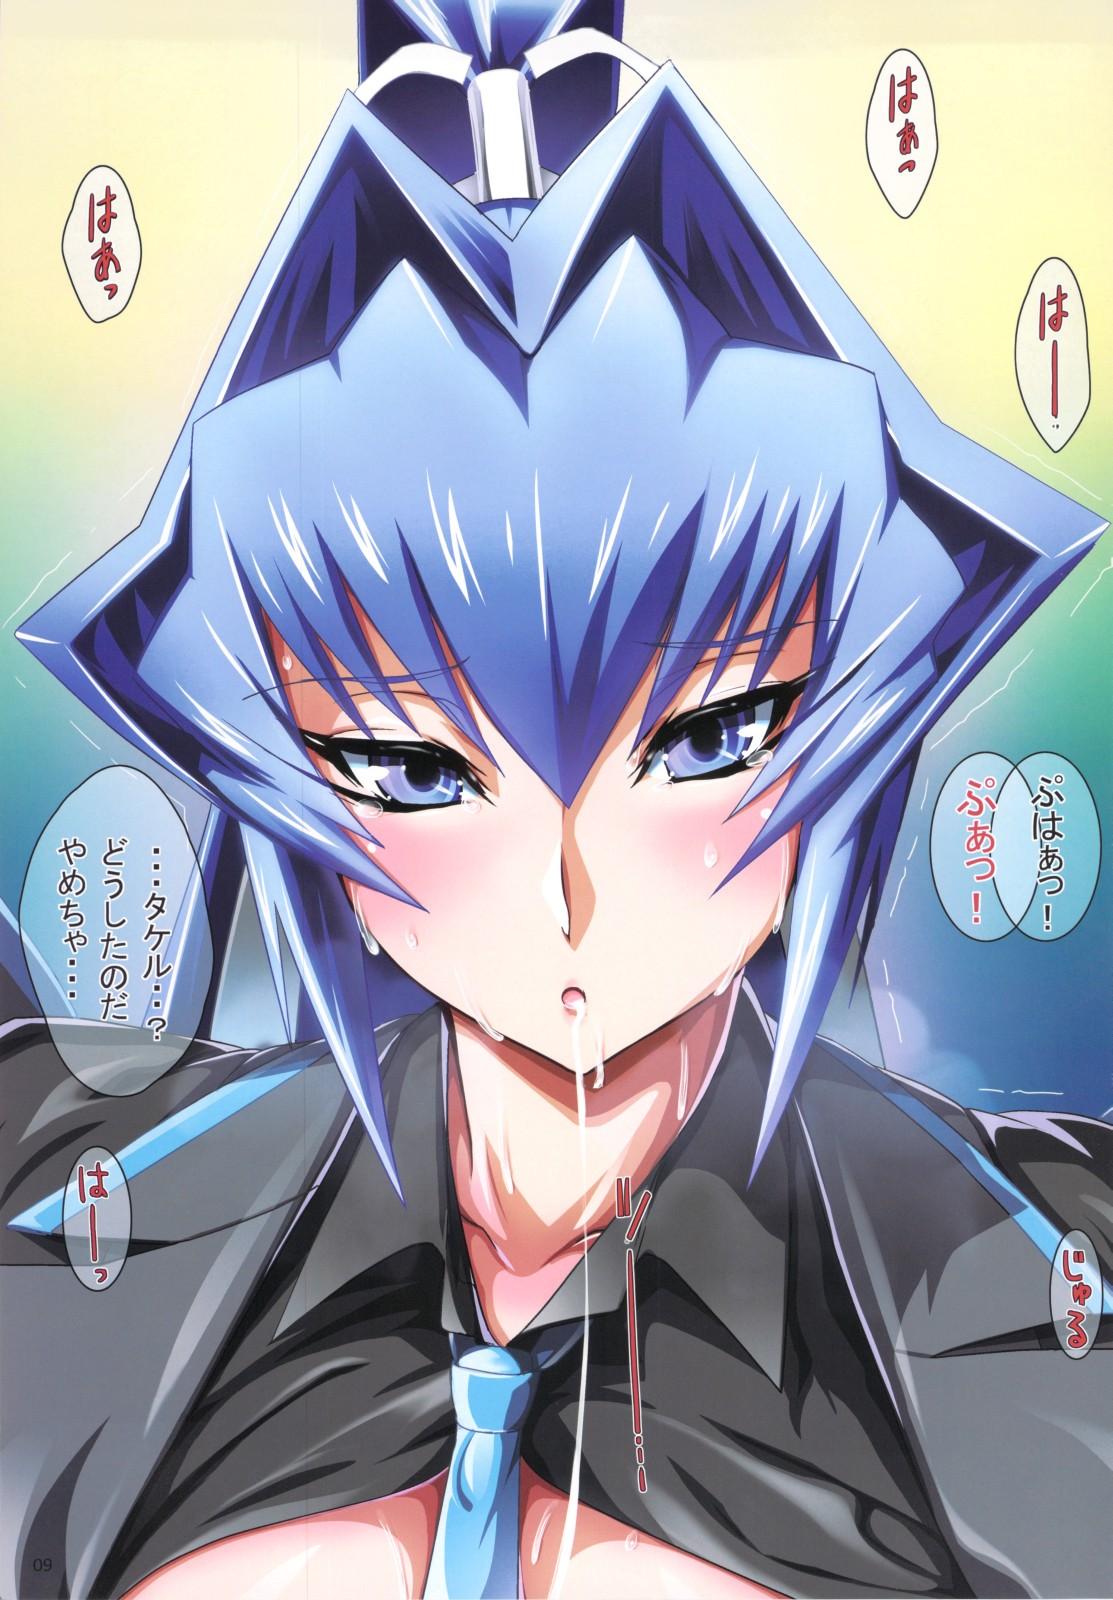 Virginity engage - Muv-luv Kitchen - Page 8